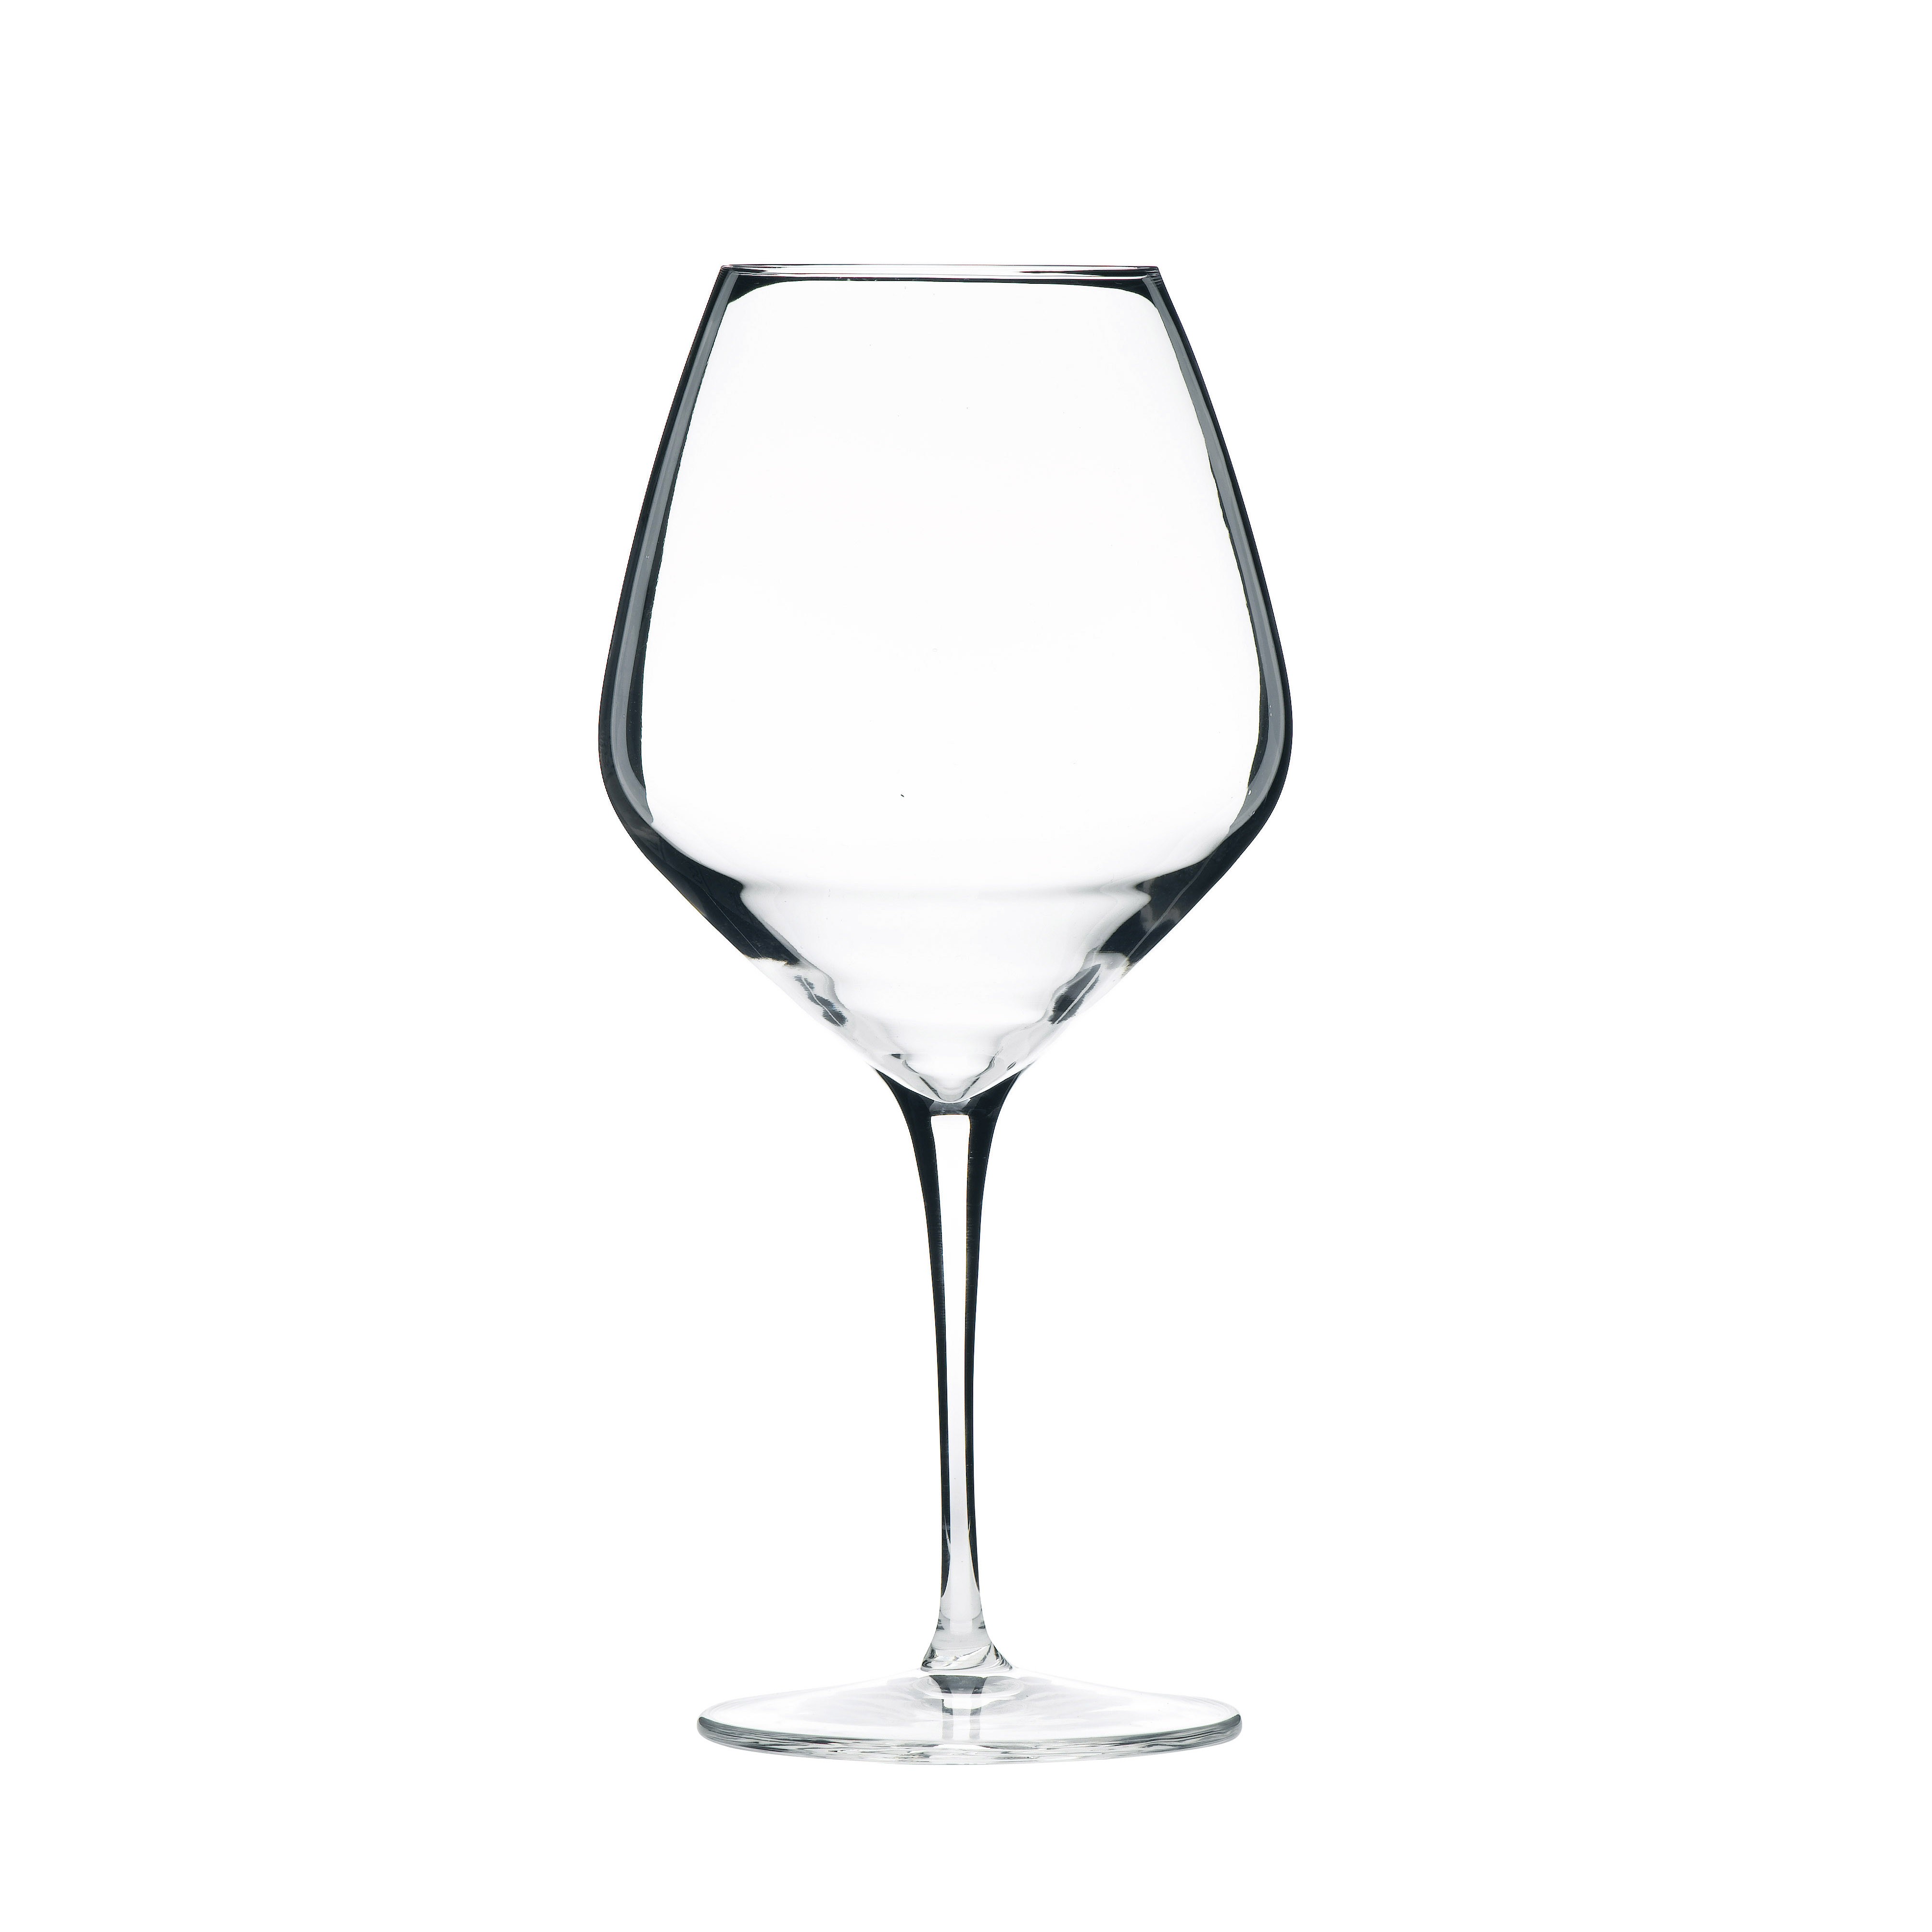  Atelier Red Wine Glasses 28oz / 80cl 